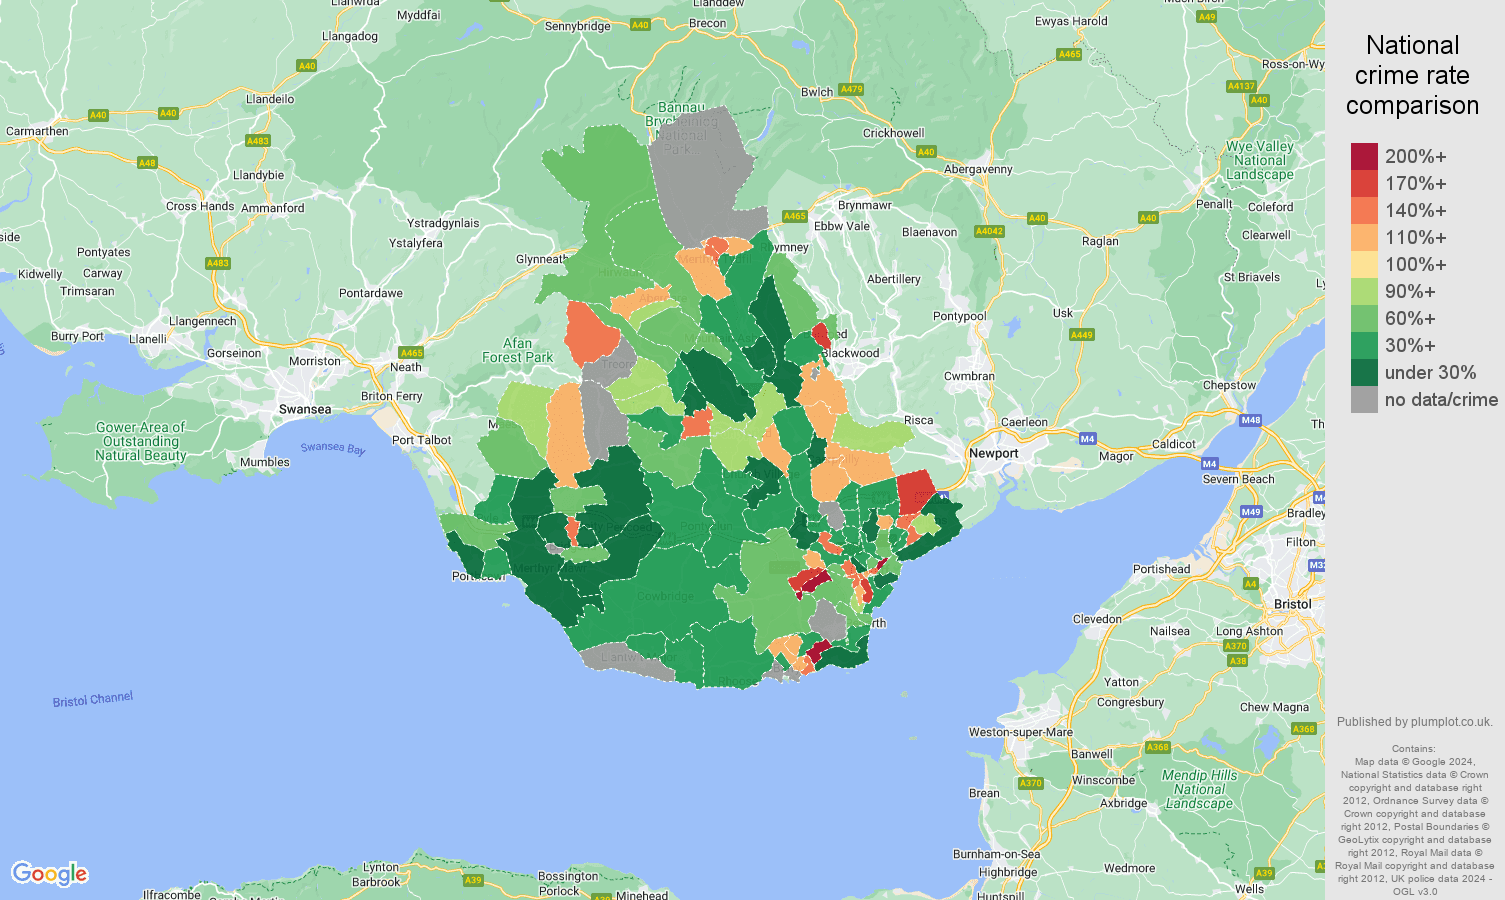 Cardiff possession of weapons crime rate comparison map